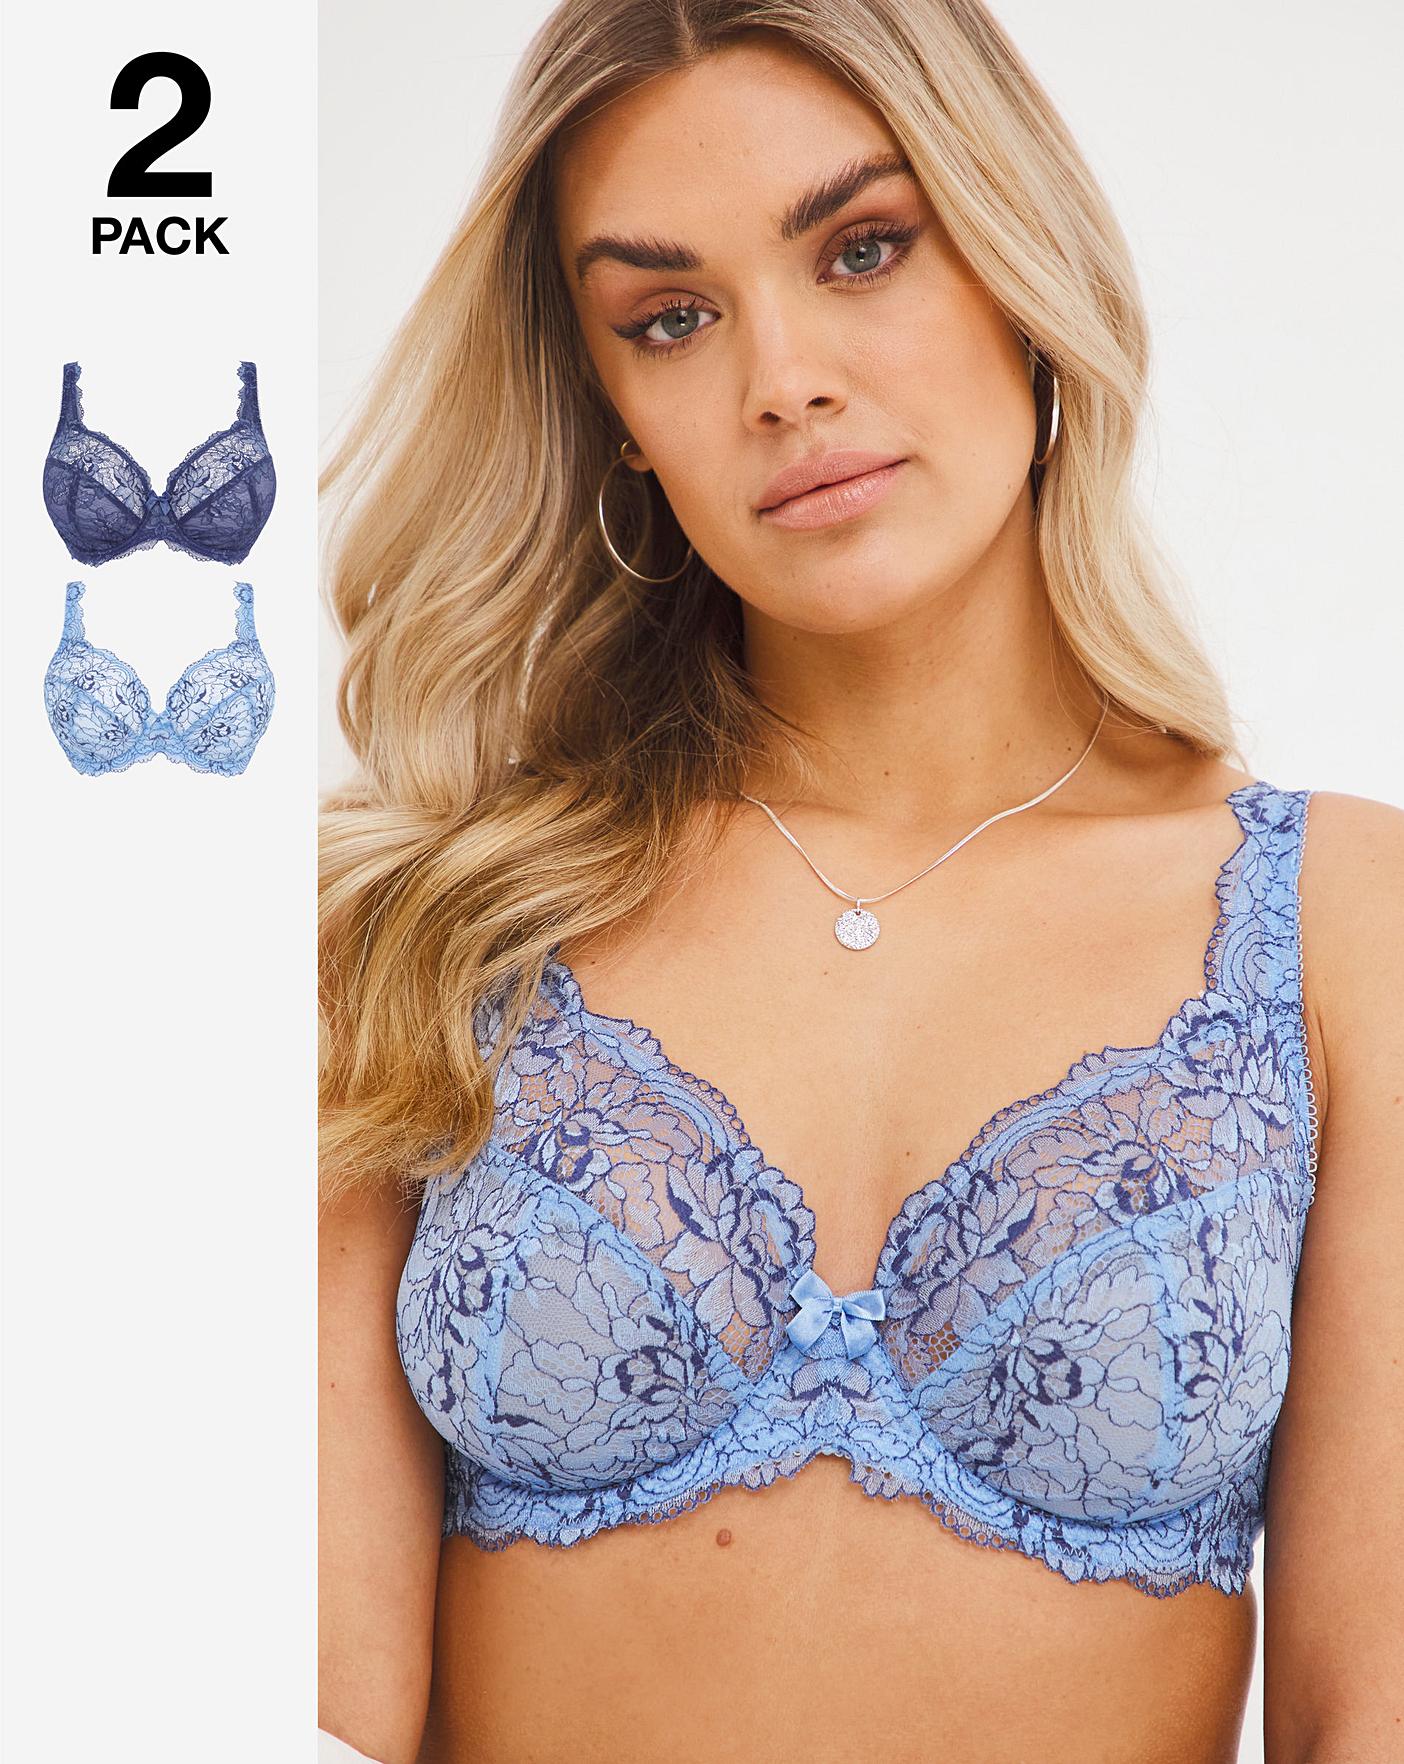 Stunning White Lace Bra in Size 36J - Limited Time Offer